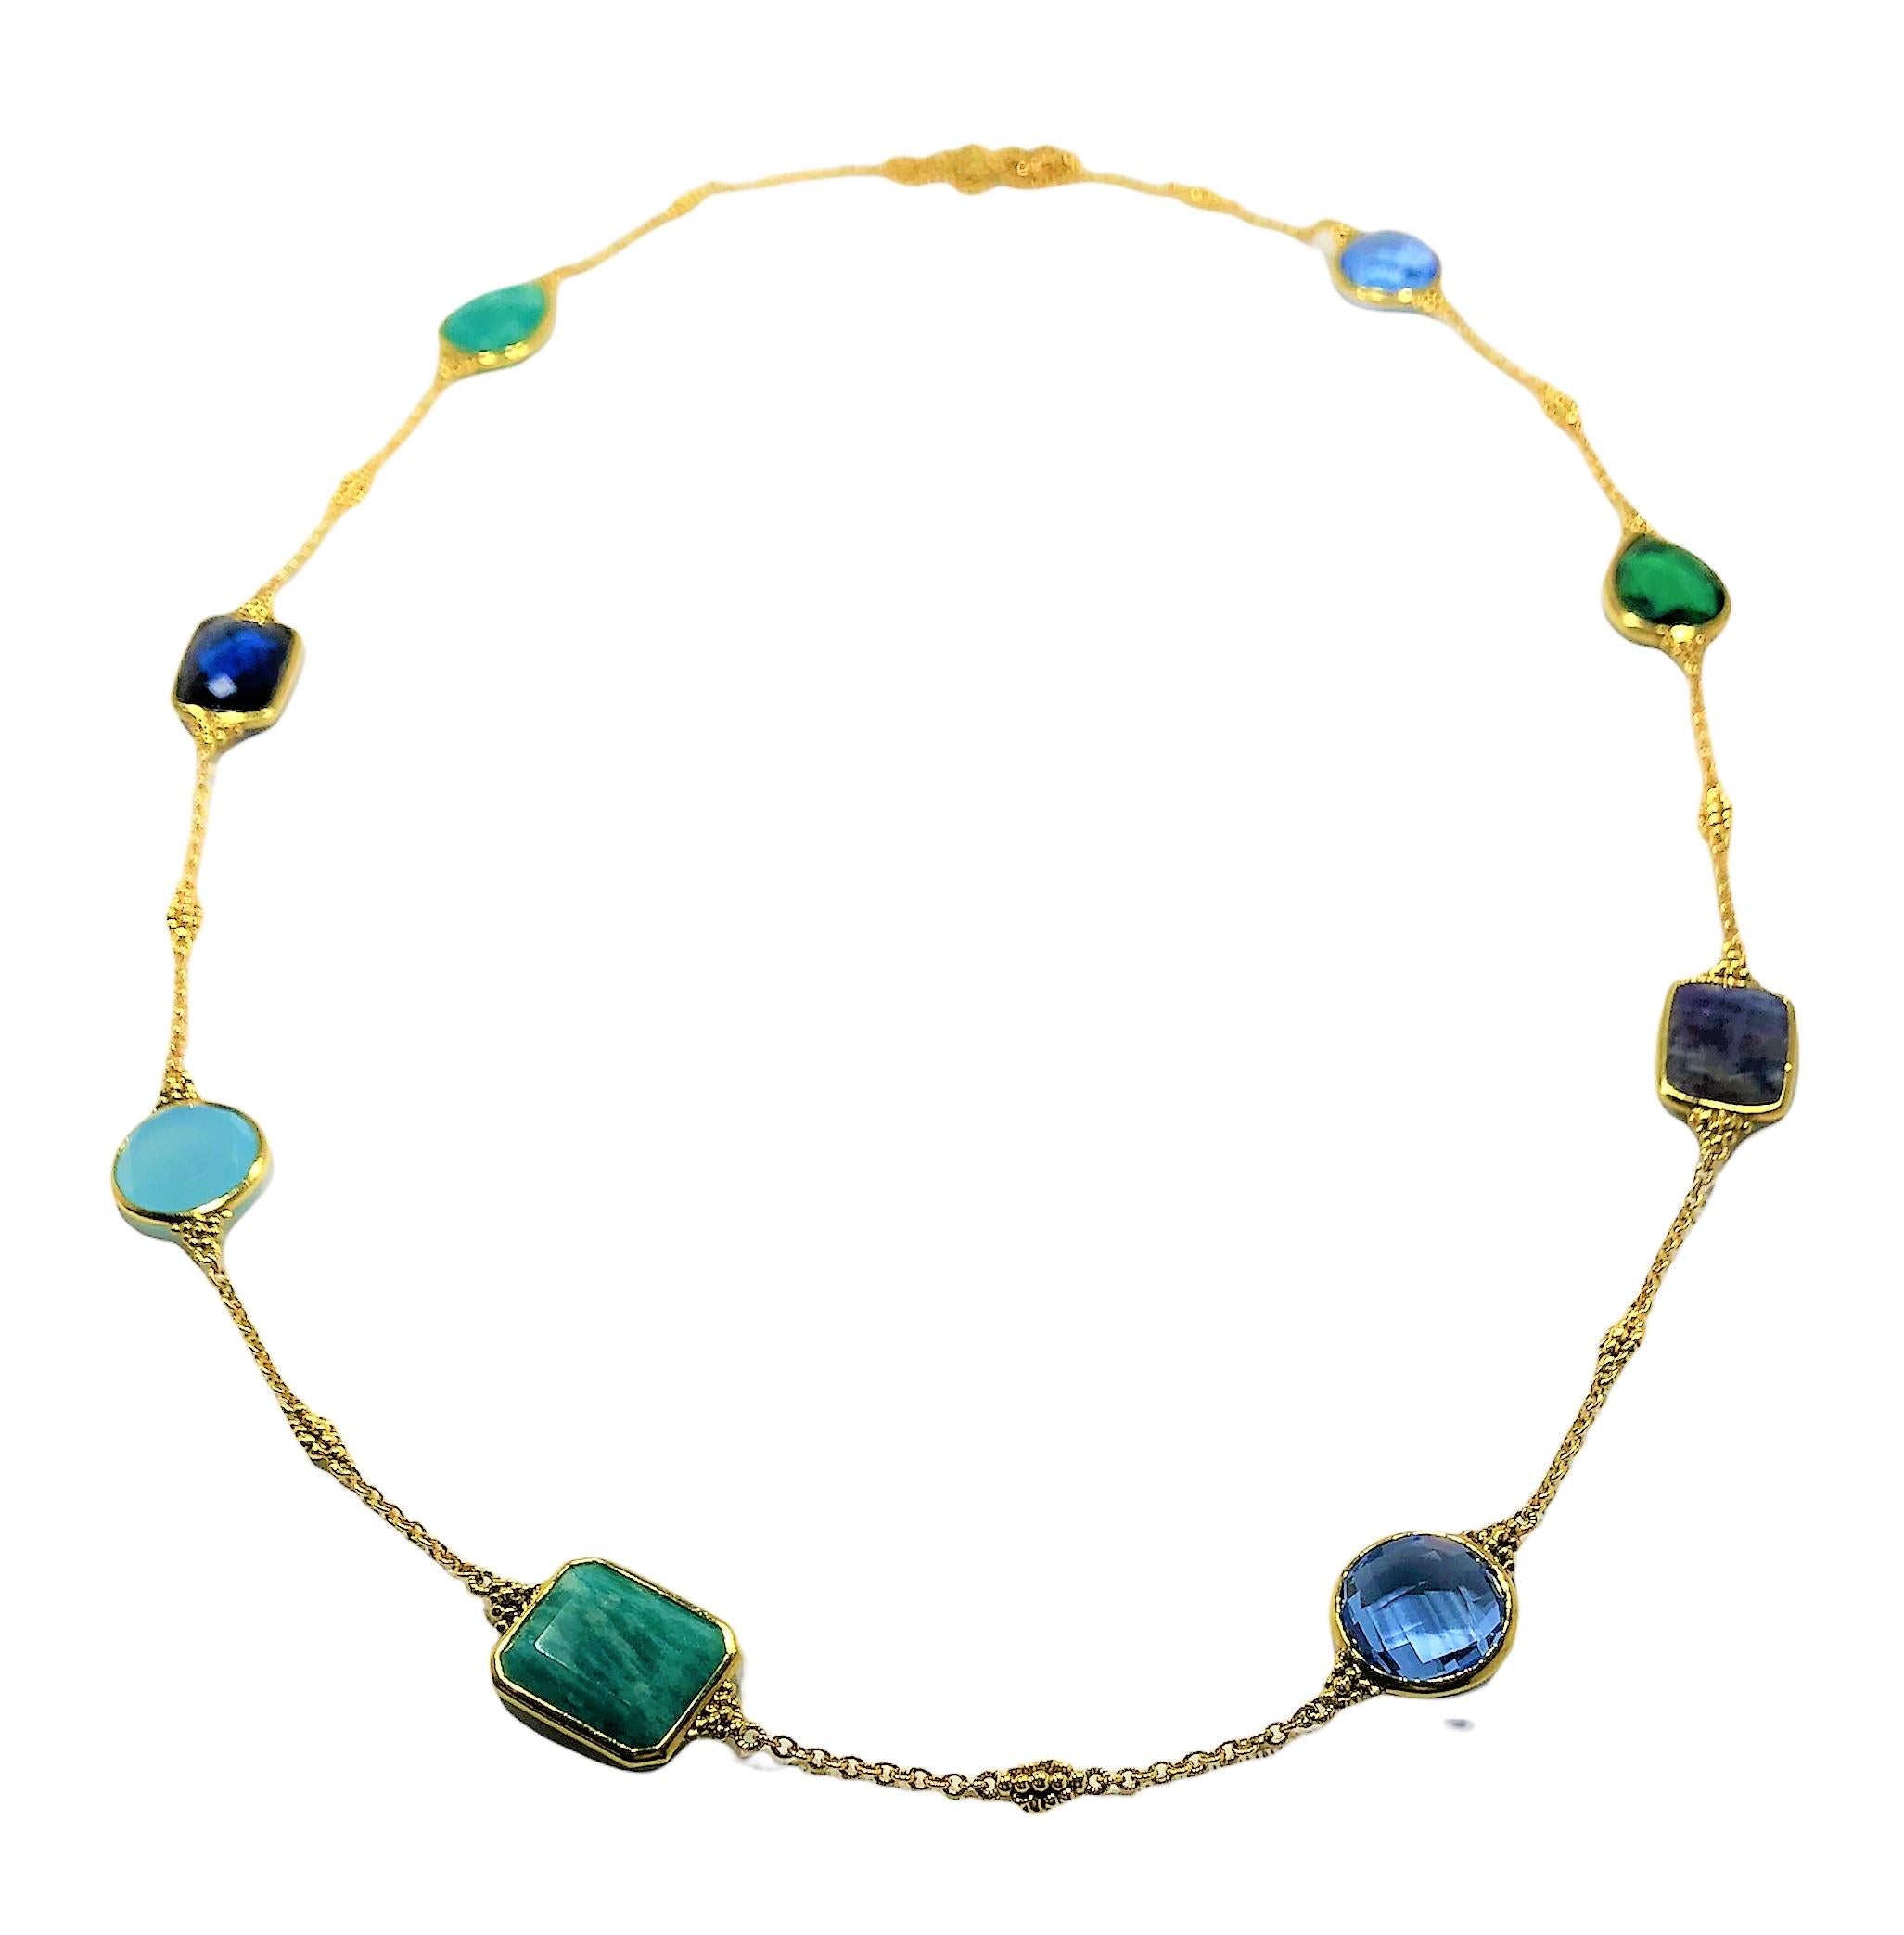 This stylish 34 inch long  18k yellow gold neck chain by Judith Ripka is bezel set with assorted, faceted,  natural and synthetic colored stones in various hues of green and blue.  All stones along the necklace's length range in size from  1/2 inch